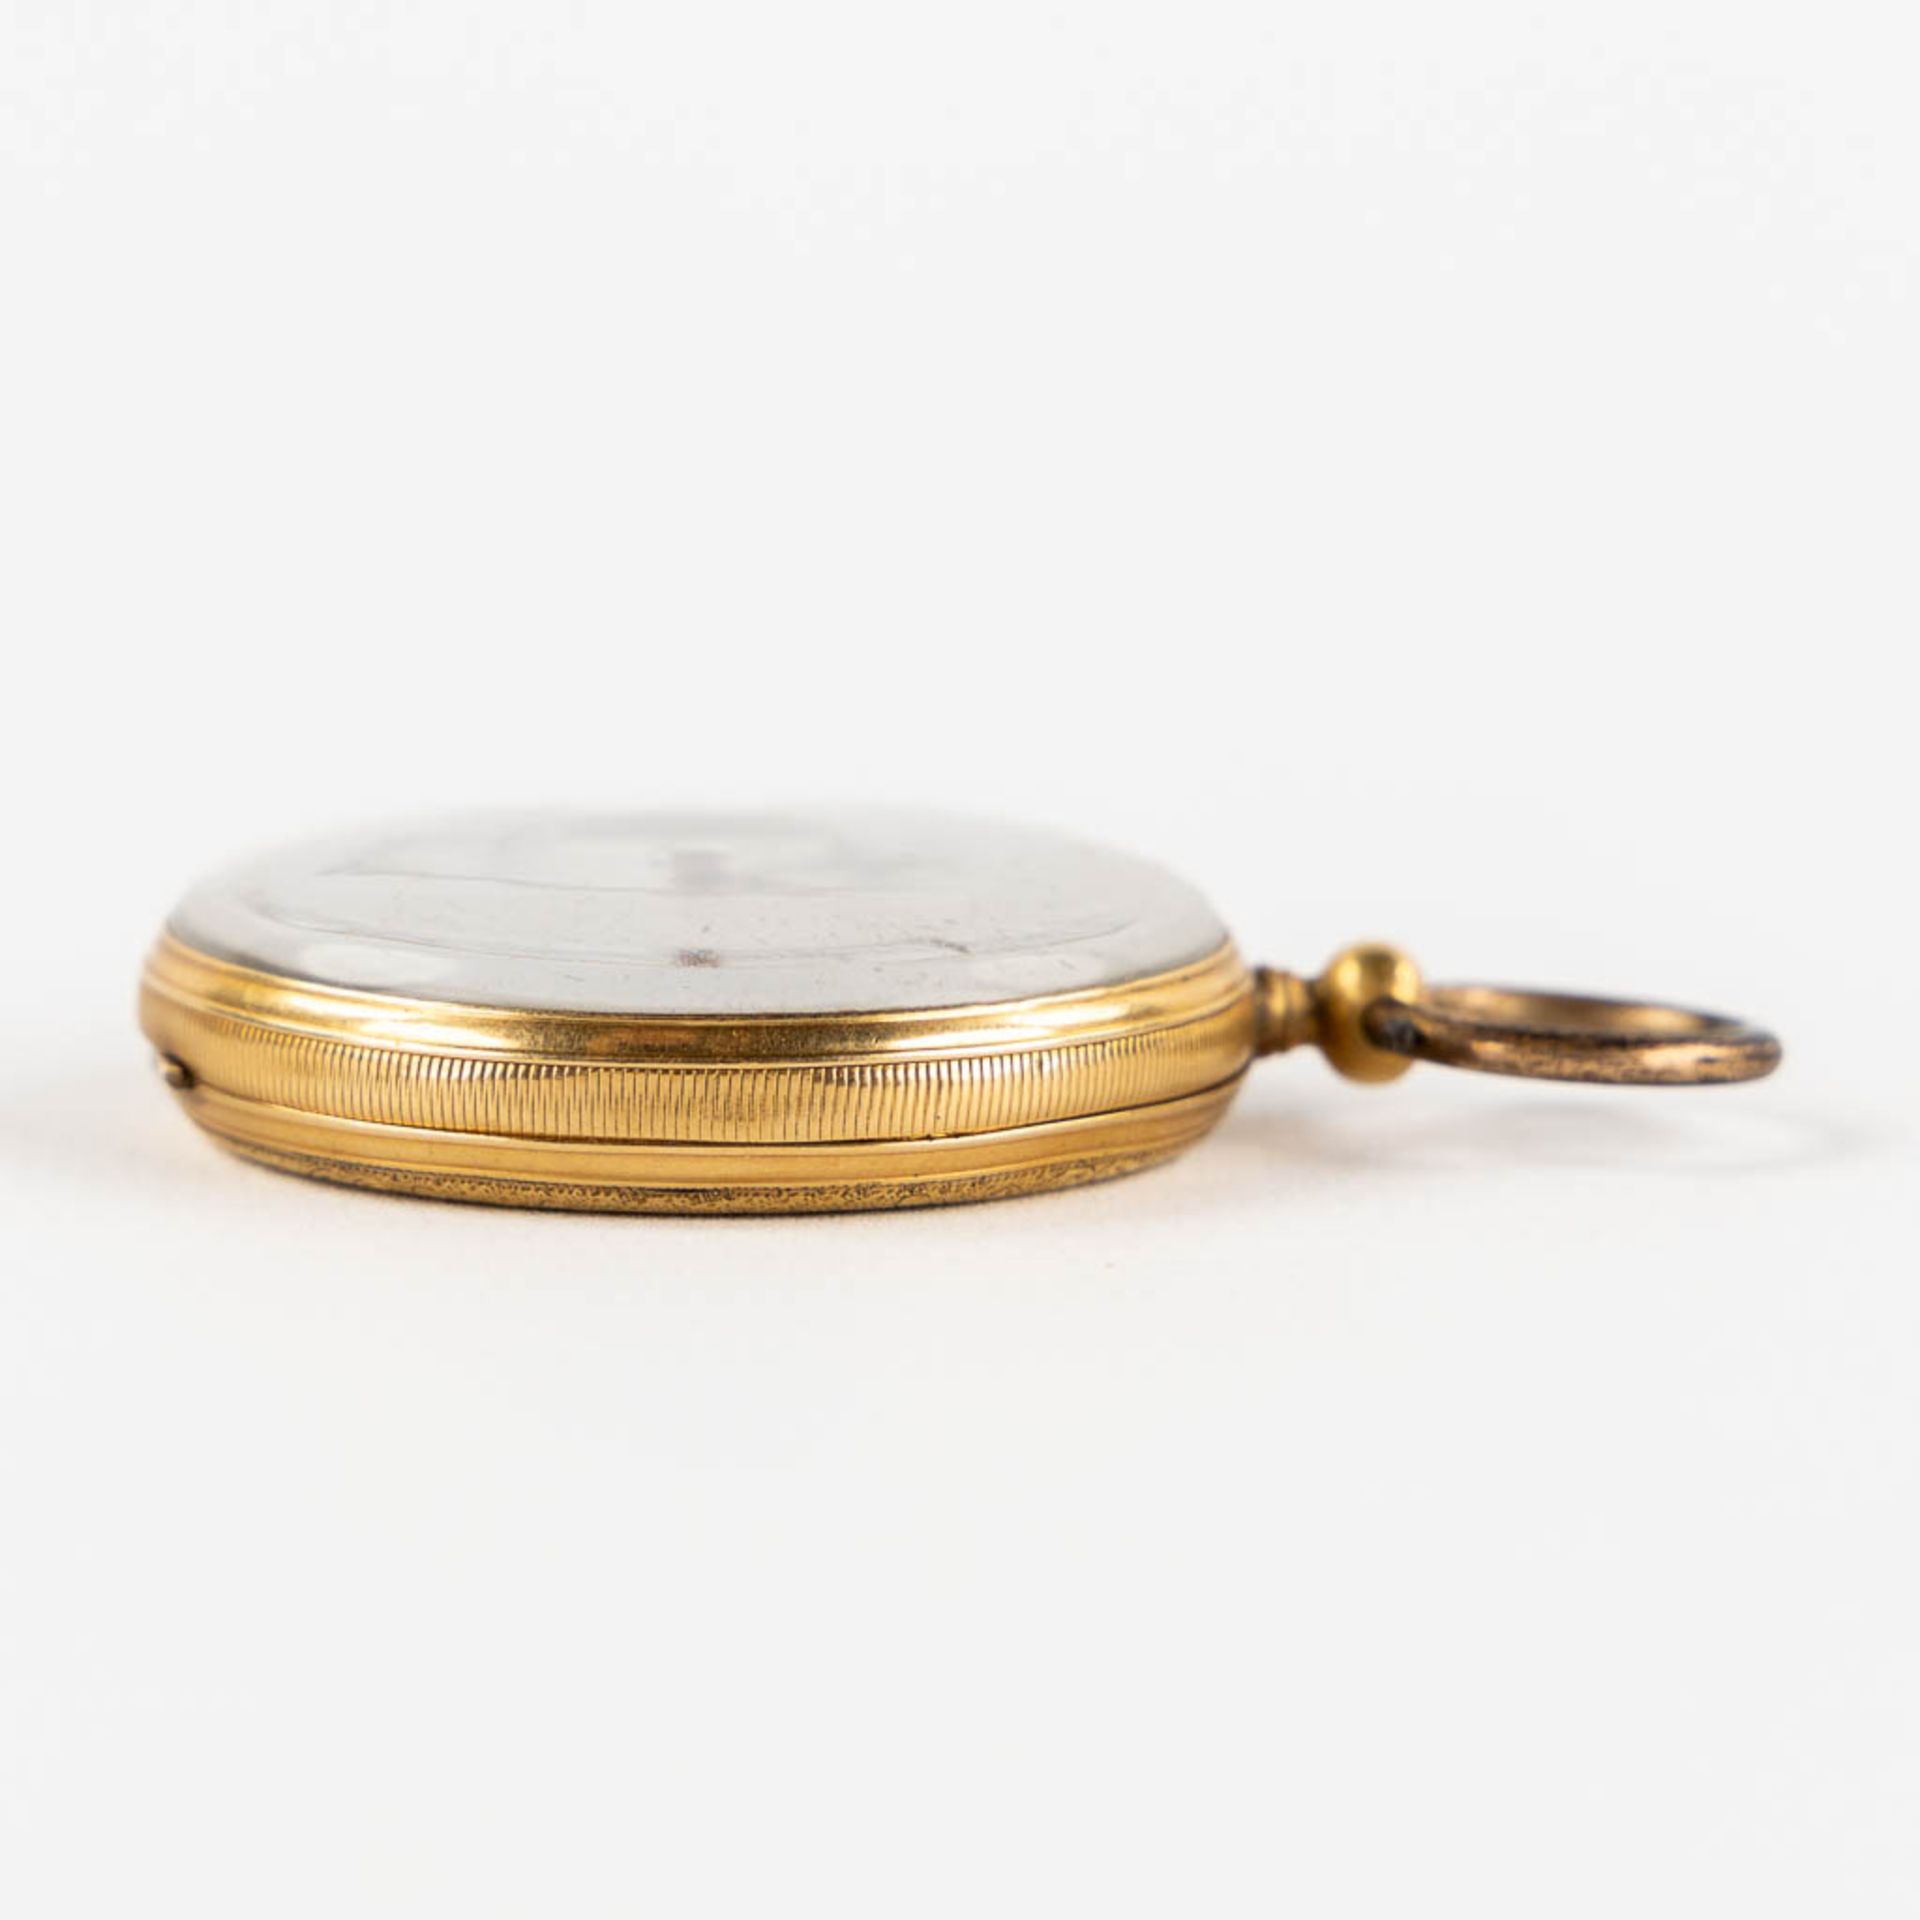 An antique pocket watch, 18kt yellow gold. Guioche image of a running horse. (W:4,3 x H:6,3 cm) - Image 5 of 15